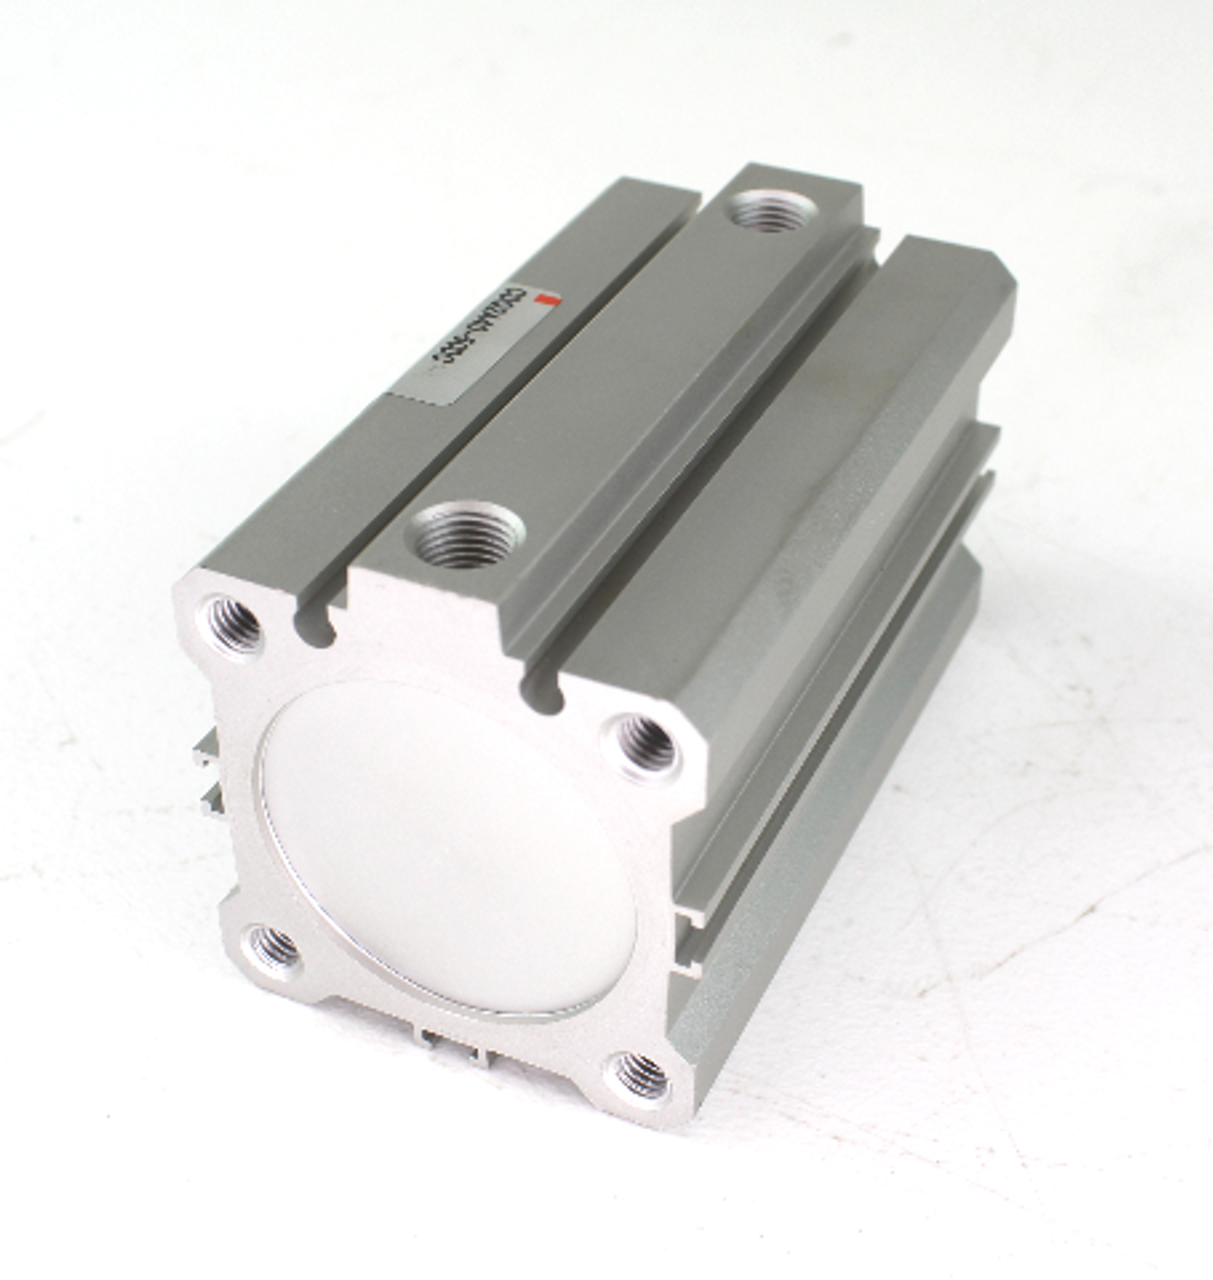 SMC CDQ2A40-50DC-X838 Compact Pneumatic Cylinder 40mm Bore 50mm Stroke